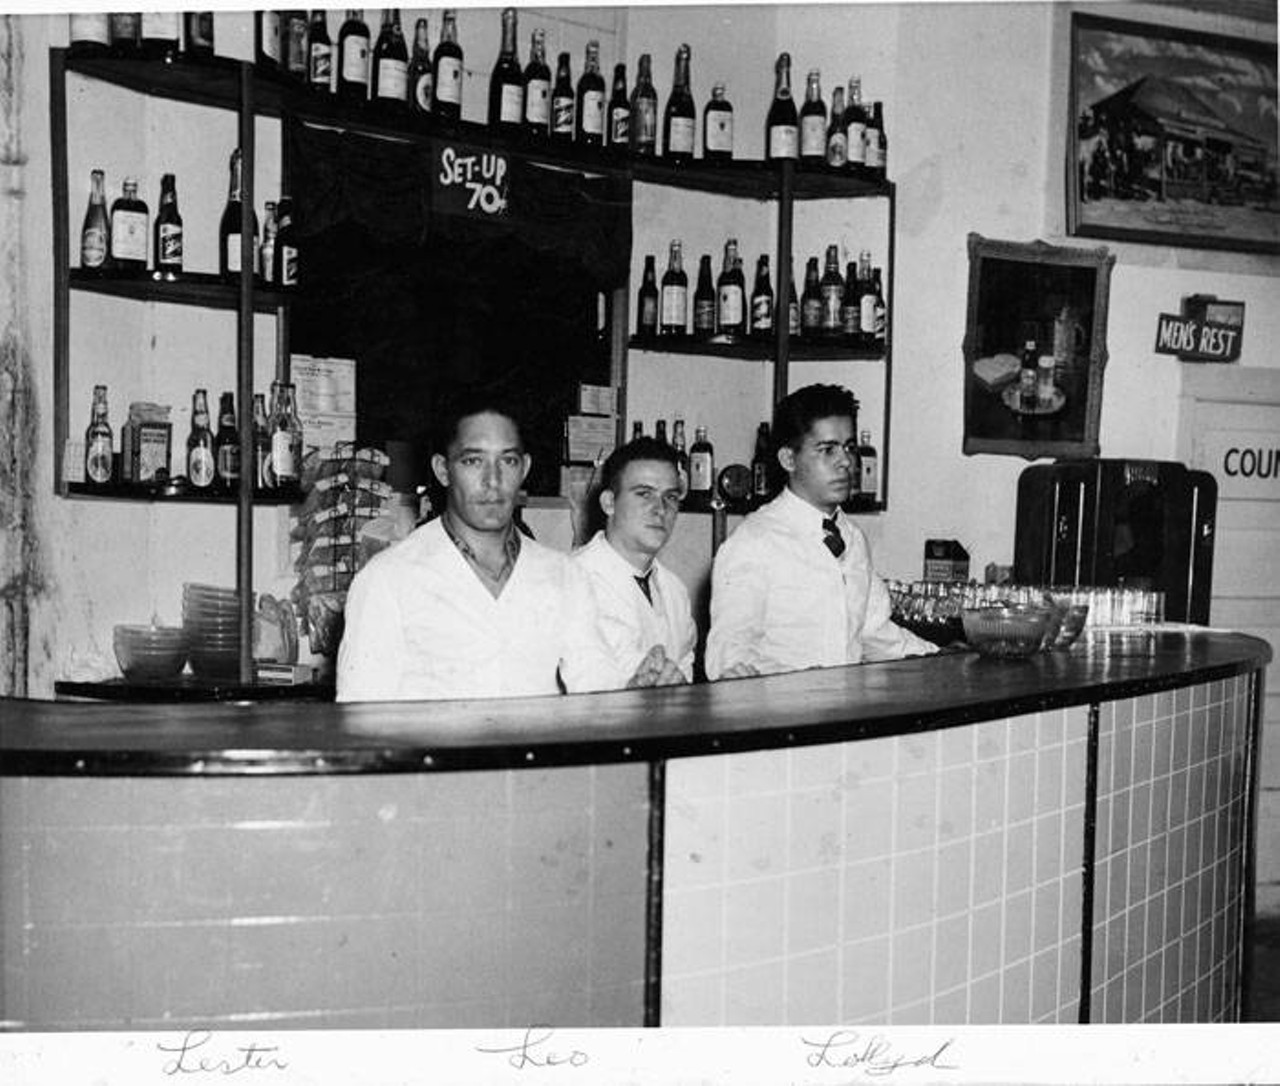 Don's Keyhole Club, 728 Iowa St.Bartenders in white jackets stand ready to pour drinks in this 1940s photo from the East Side nightclub owned by jazz bandleader Albert ''Don Albert'' Dominique. The famed music veue is considered by many to be the first racially integrated nightclub in the Southwest.